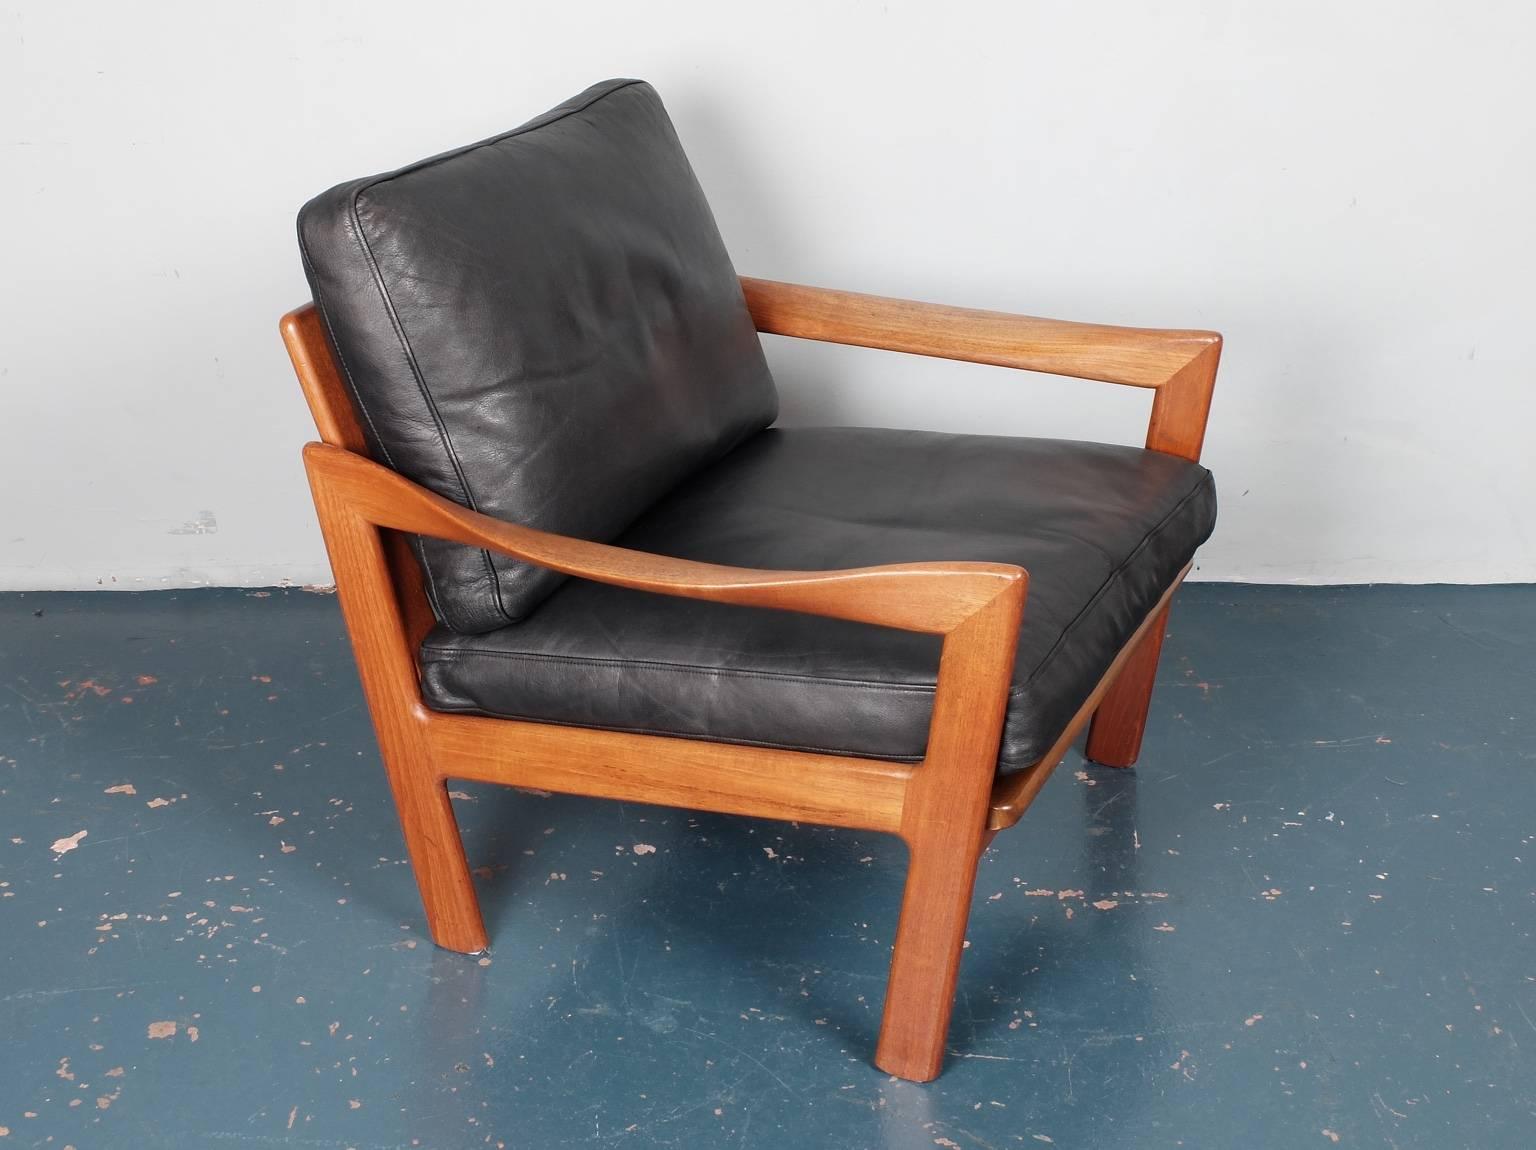 A teak framed armchair designed by Illum Wikkelsø and produced by Eilersen, Denmark, circa 1960. We have 4 of these armchairs available at the moment that can be upholstered in your choice of fabric. As well as the wonderfully sculptural arms this